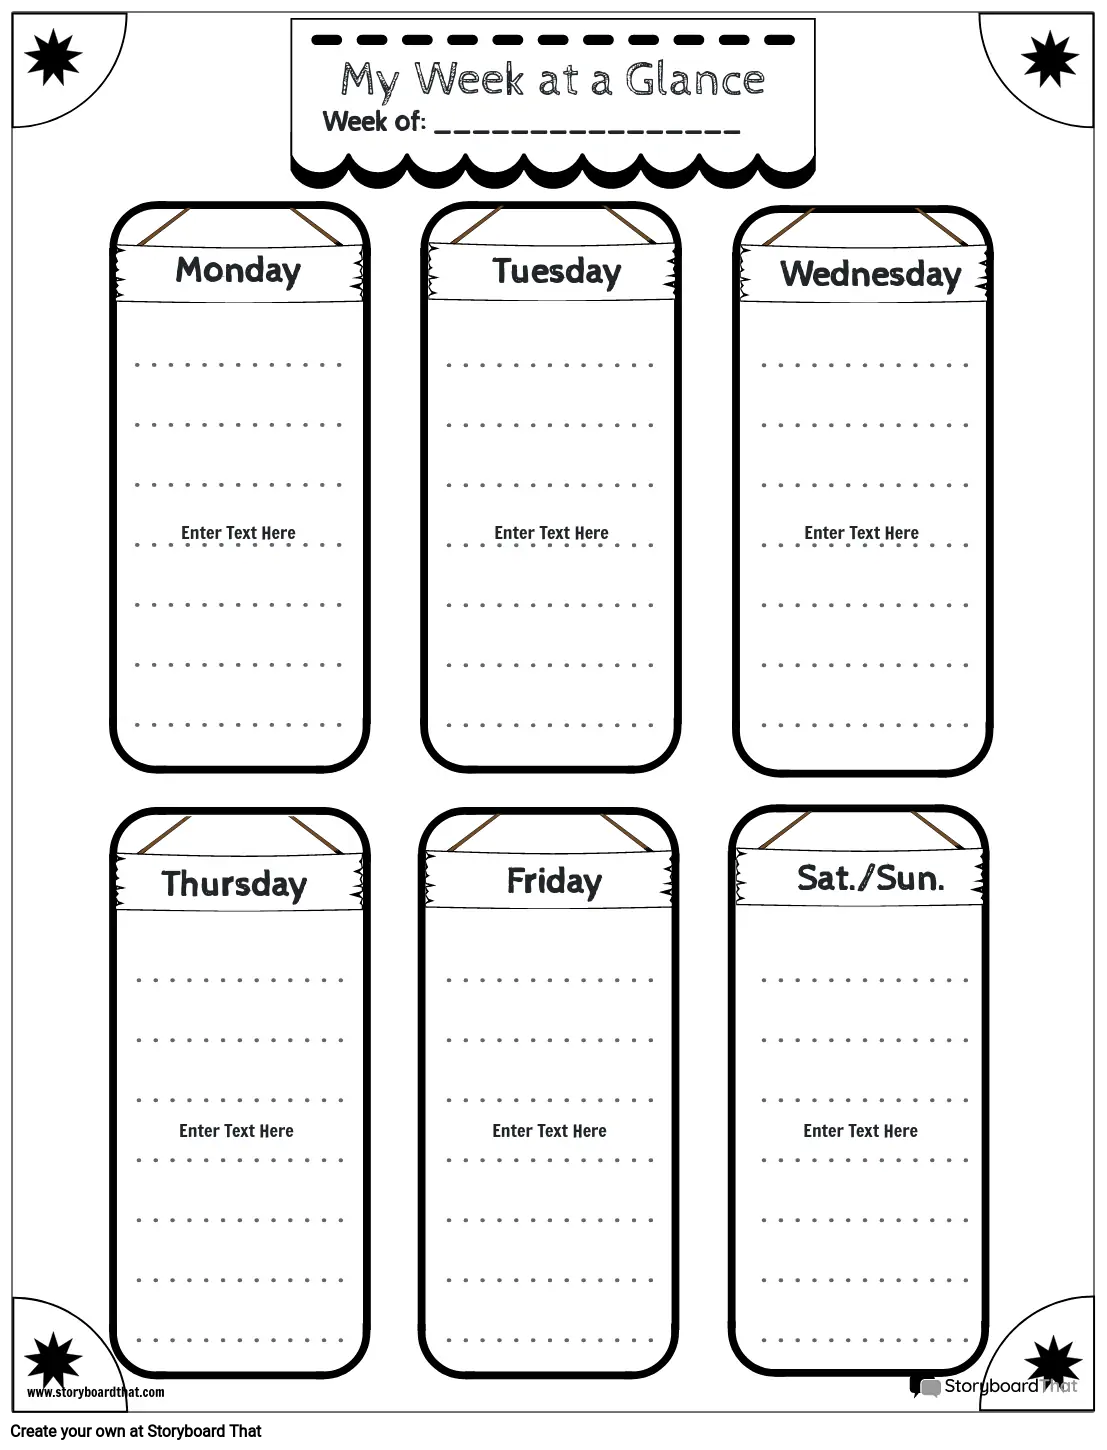 BW Weekly Planner 4